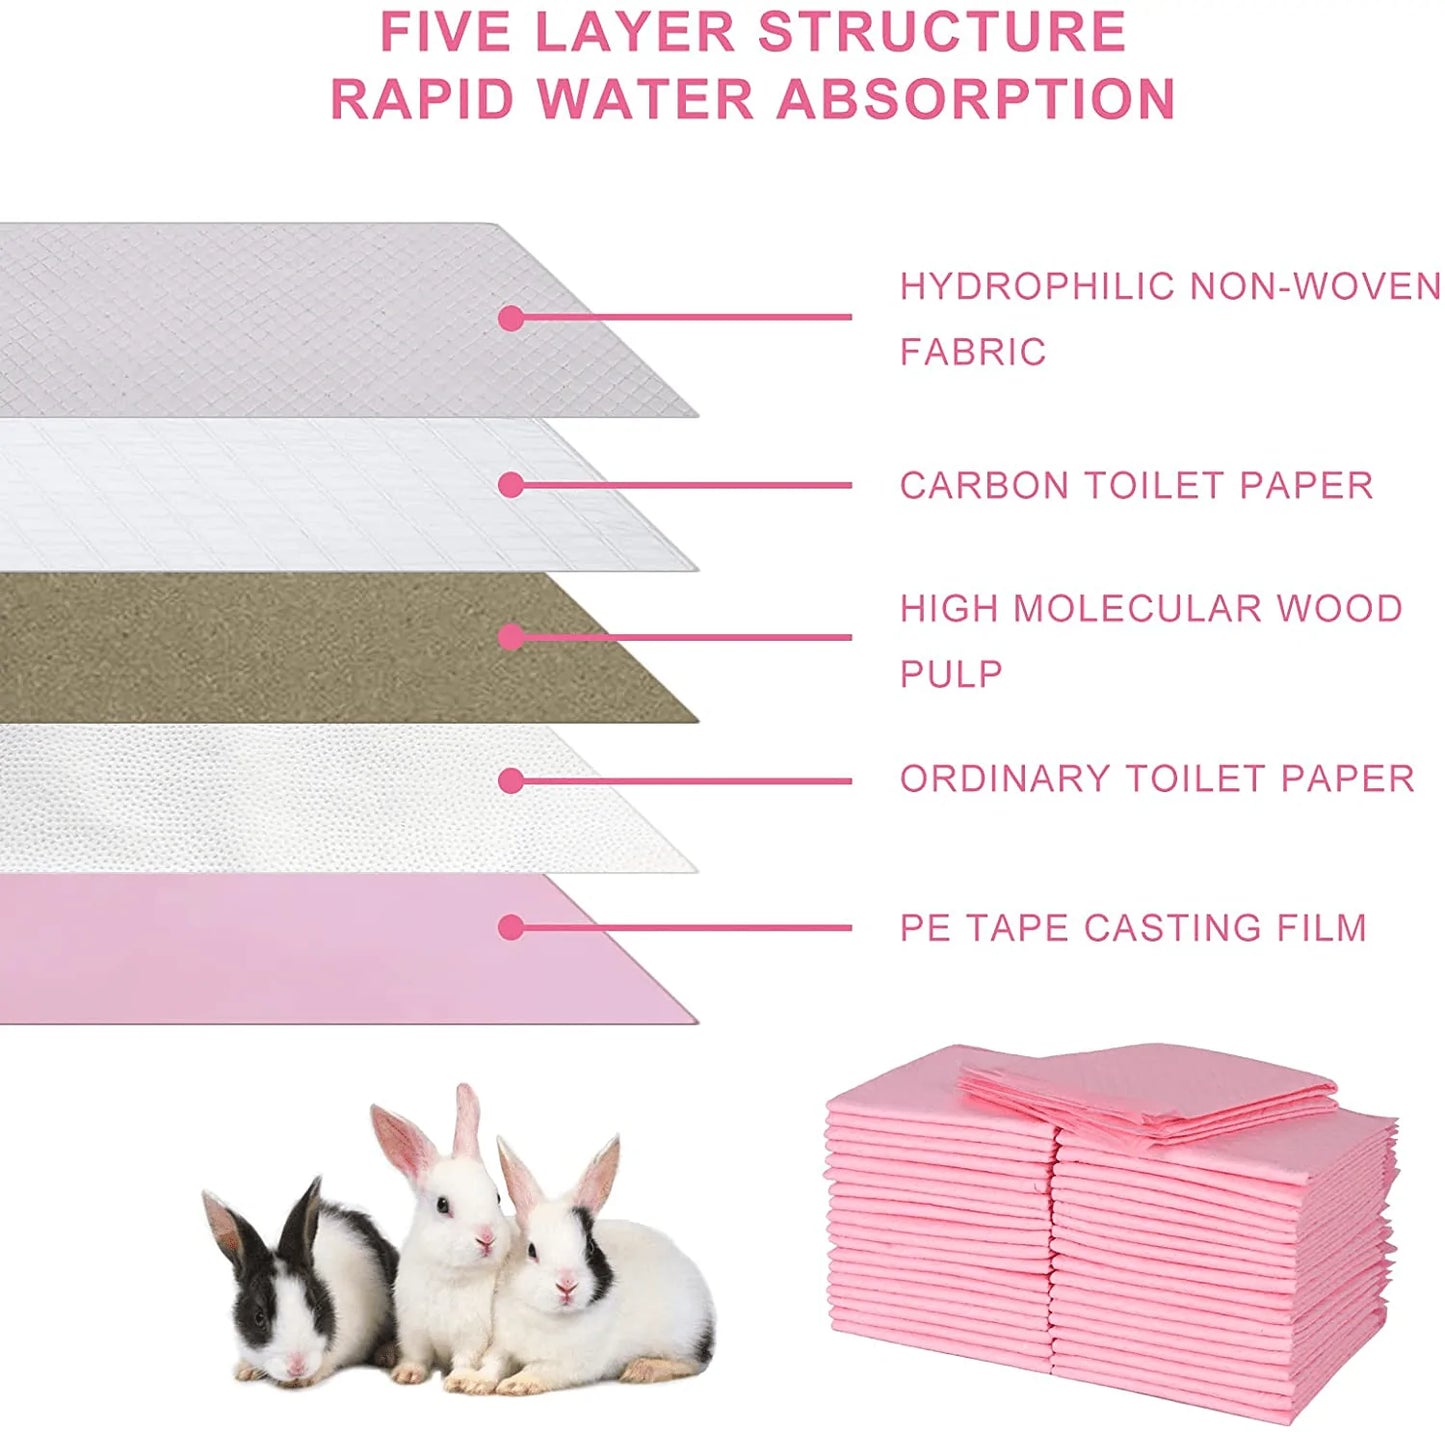 （50/100Pcs）Super Absorbent Rabbit Pee Pads, Disposable Bunny Litter Training Pad Thicken Guinea Pig Cage Liner Small Animal Diaper Pet Cage Accessory for Cat Hamster Reptile Chinchilla Hedgehog  YUNVI   